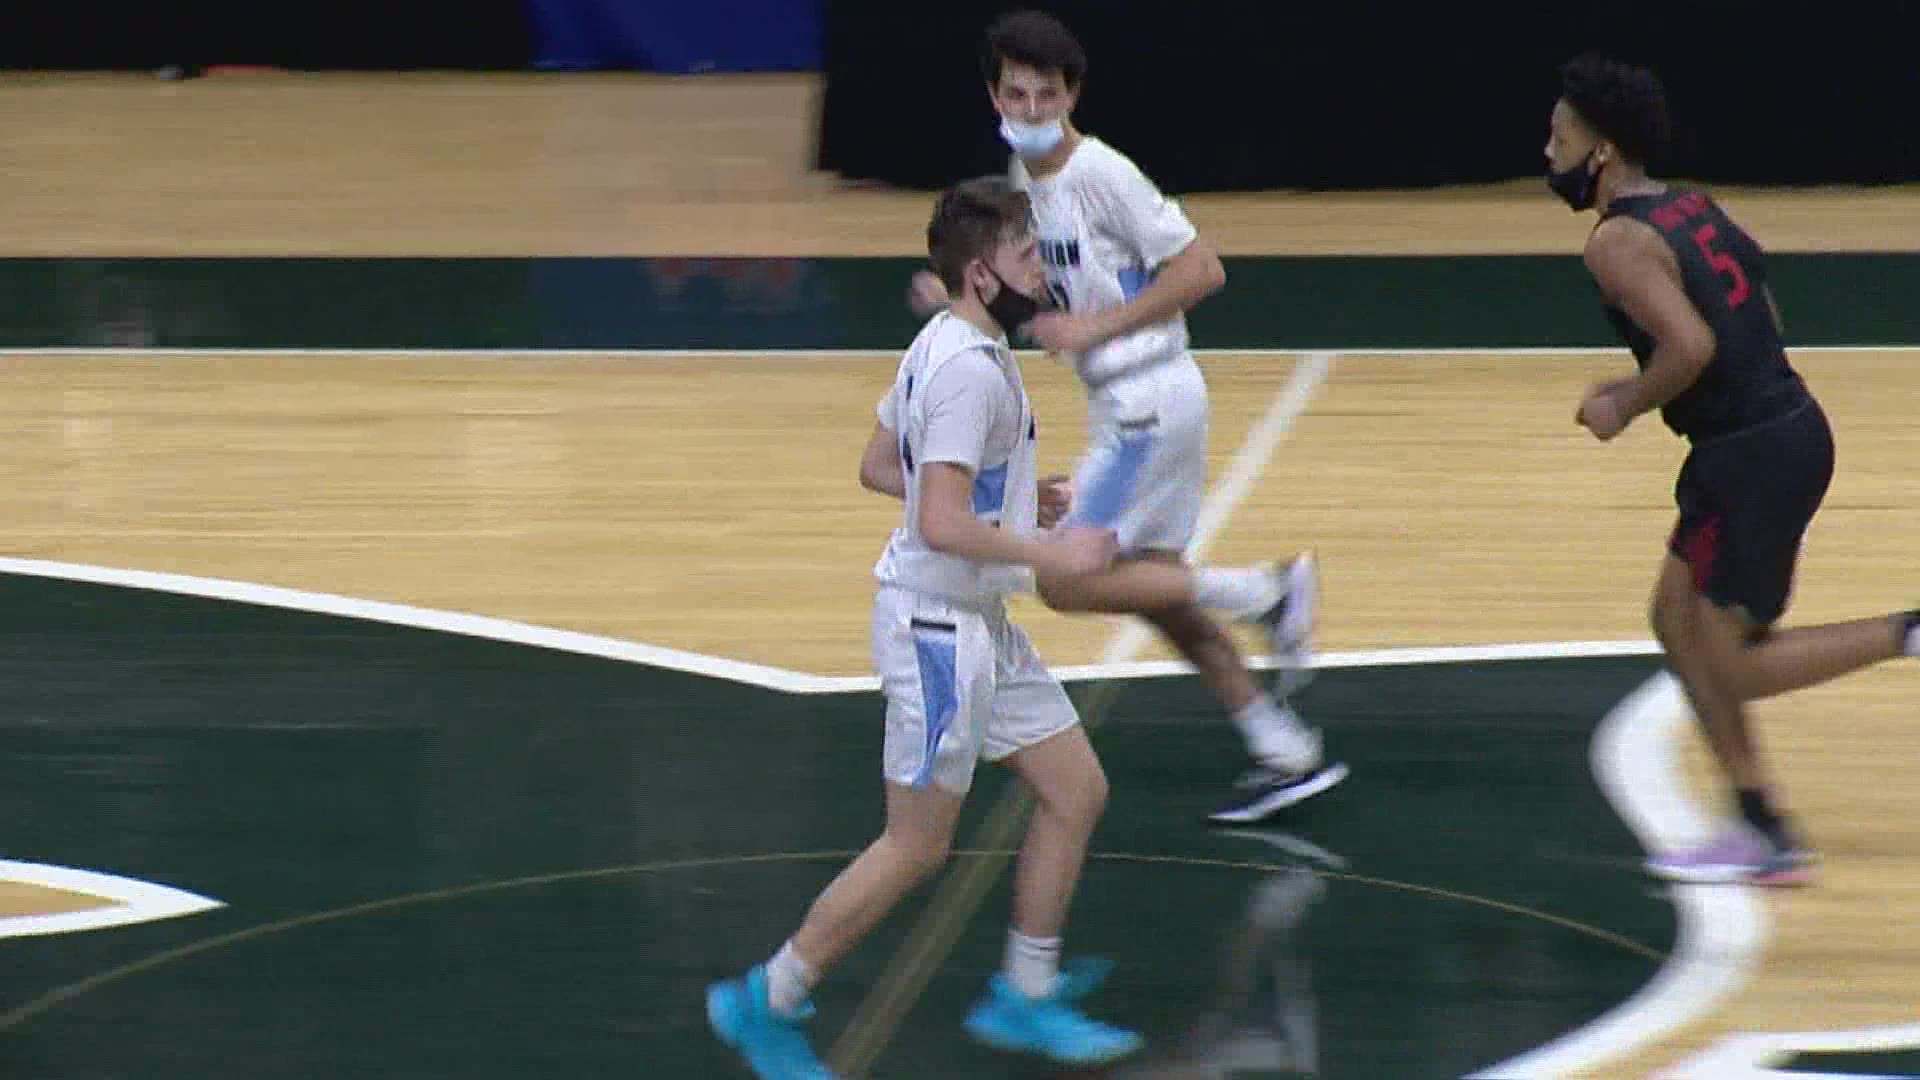 After trailing by 13 in the second quarter, the Huskies pulled through to win 68-58 and make it to the state finals.